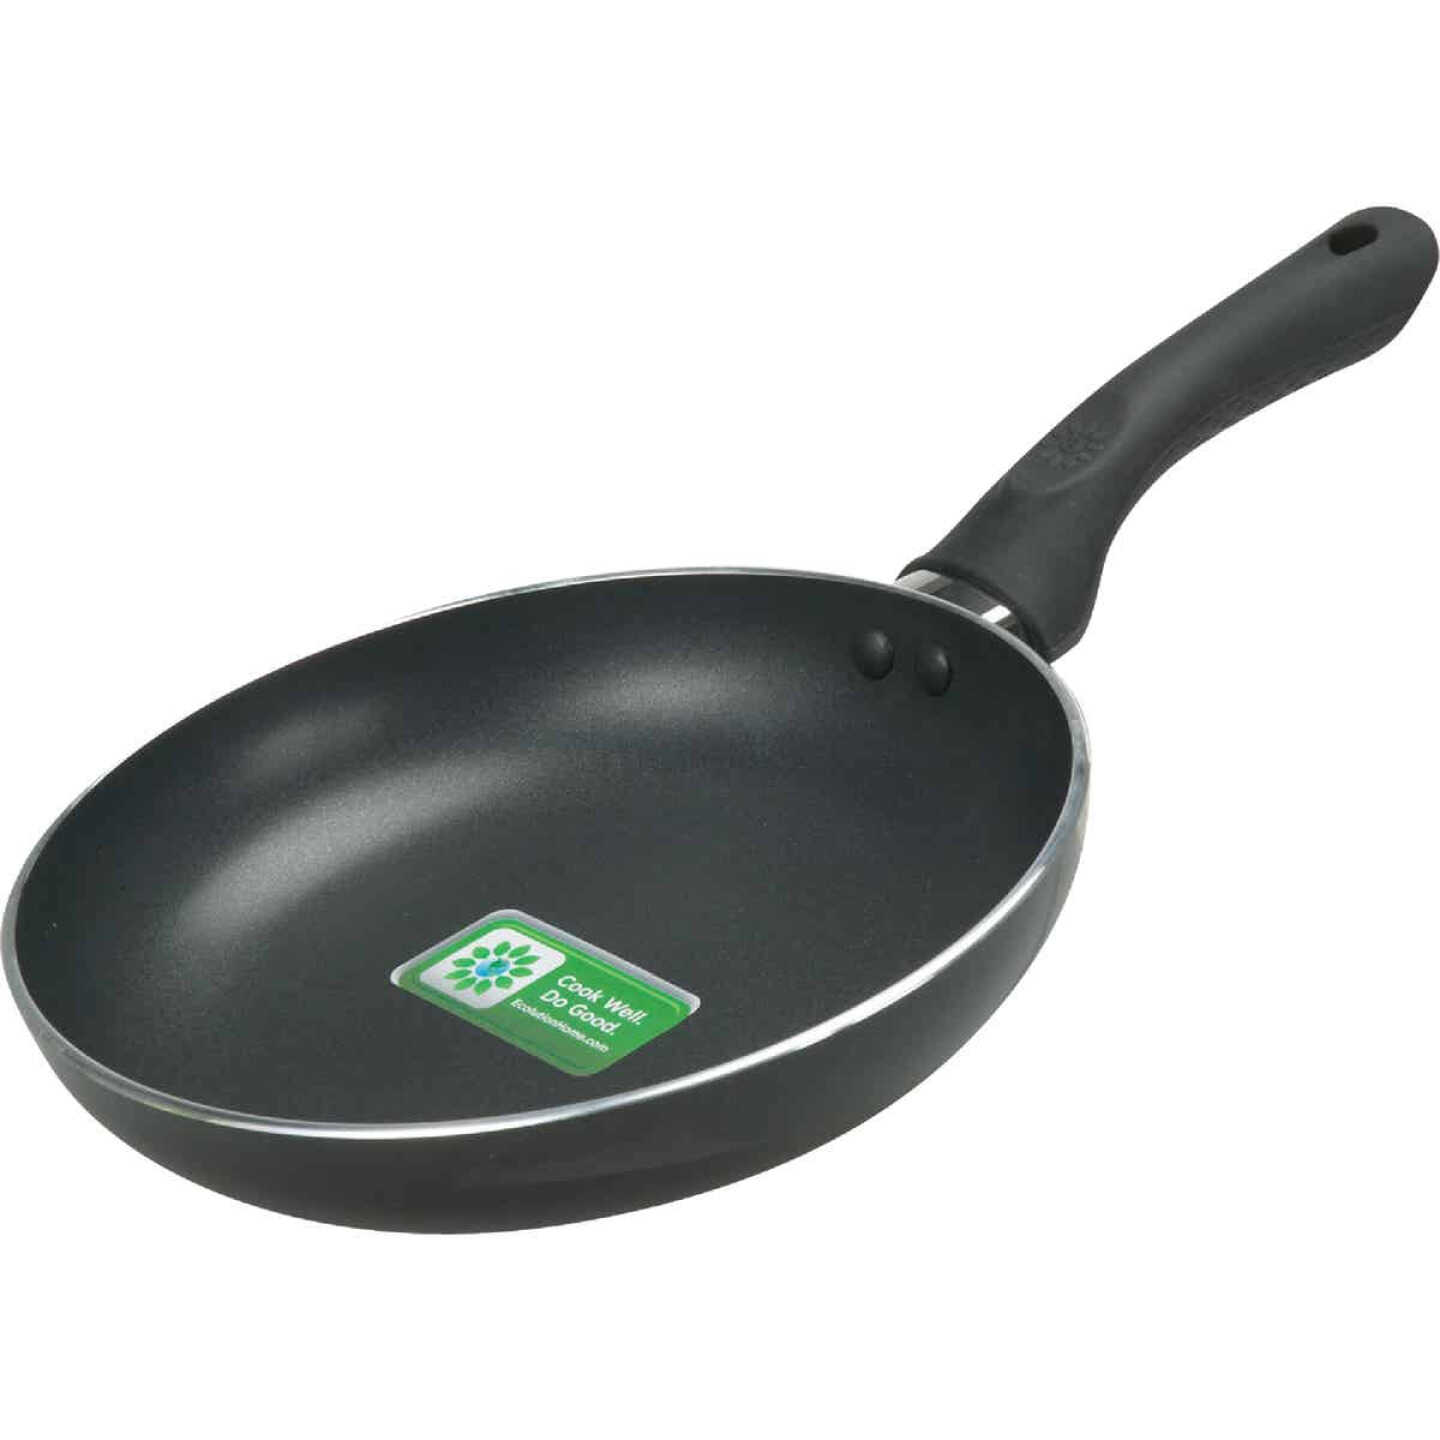 Ecolution Artistry 8 In. Black Aluminum Non-Stick Fry Pan - Foley Hardware